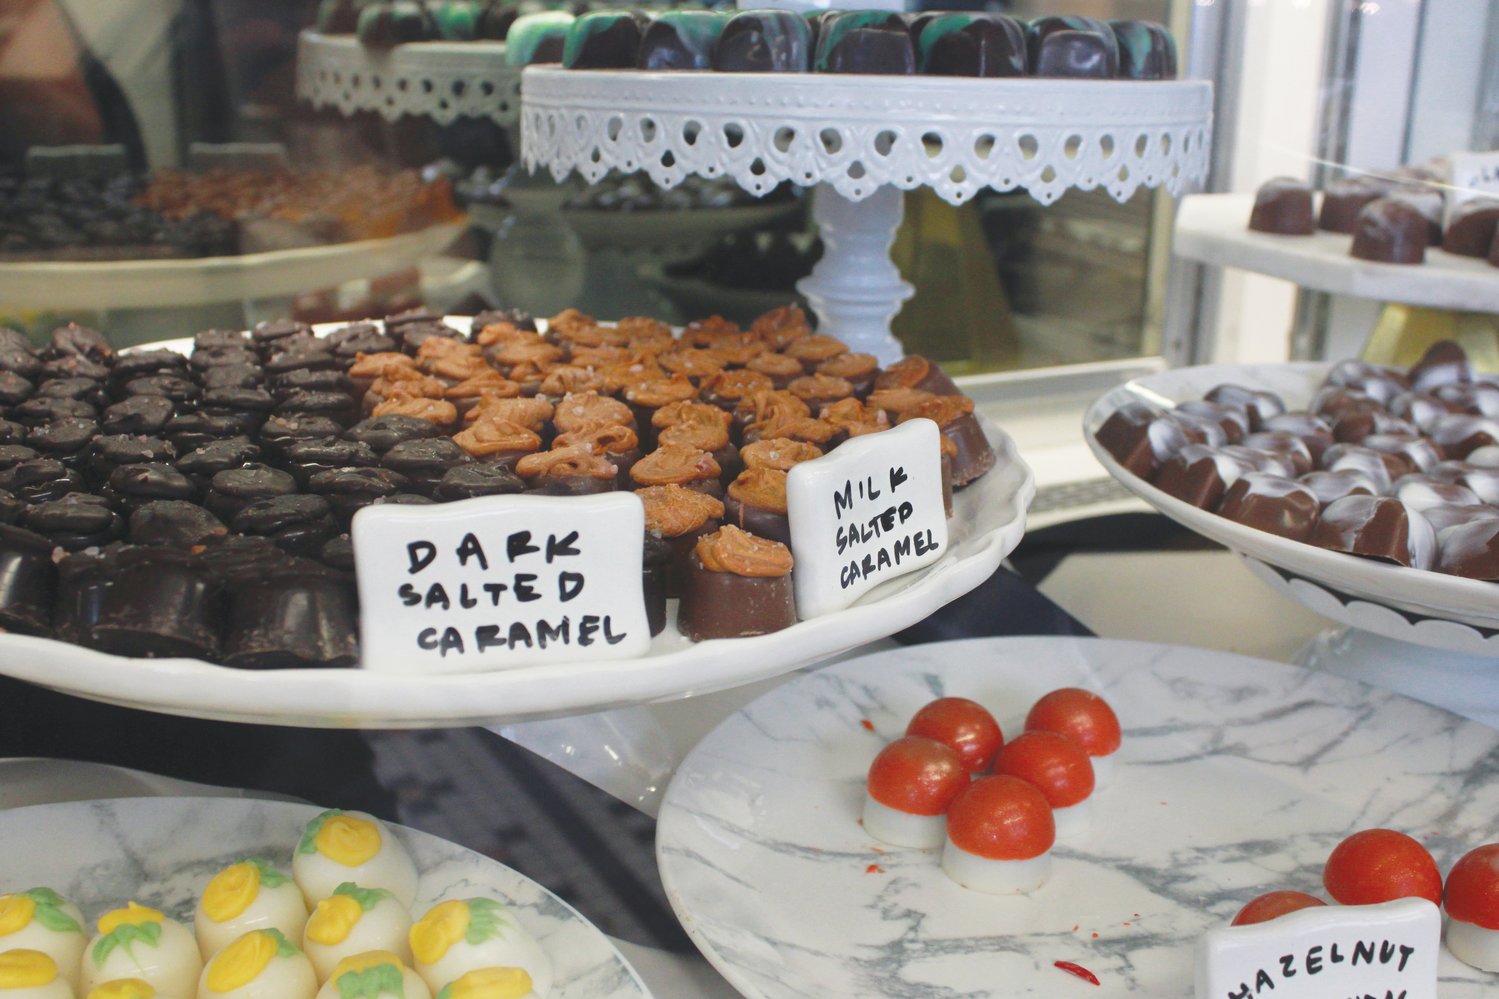 Dozens of truffles and bagged candies are on display at the front counter at the Chocolate Cellar Deux in downtown Pittsboro. The wide variety of truffle flavors include chocolate, saltred caramel, Irish cream, lemon merengue, glazed pecan, pomegranete and more.